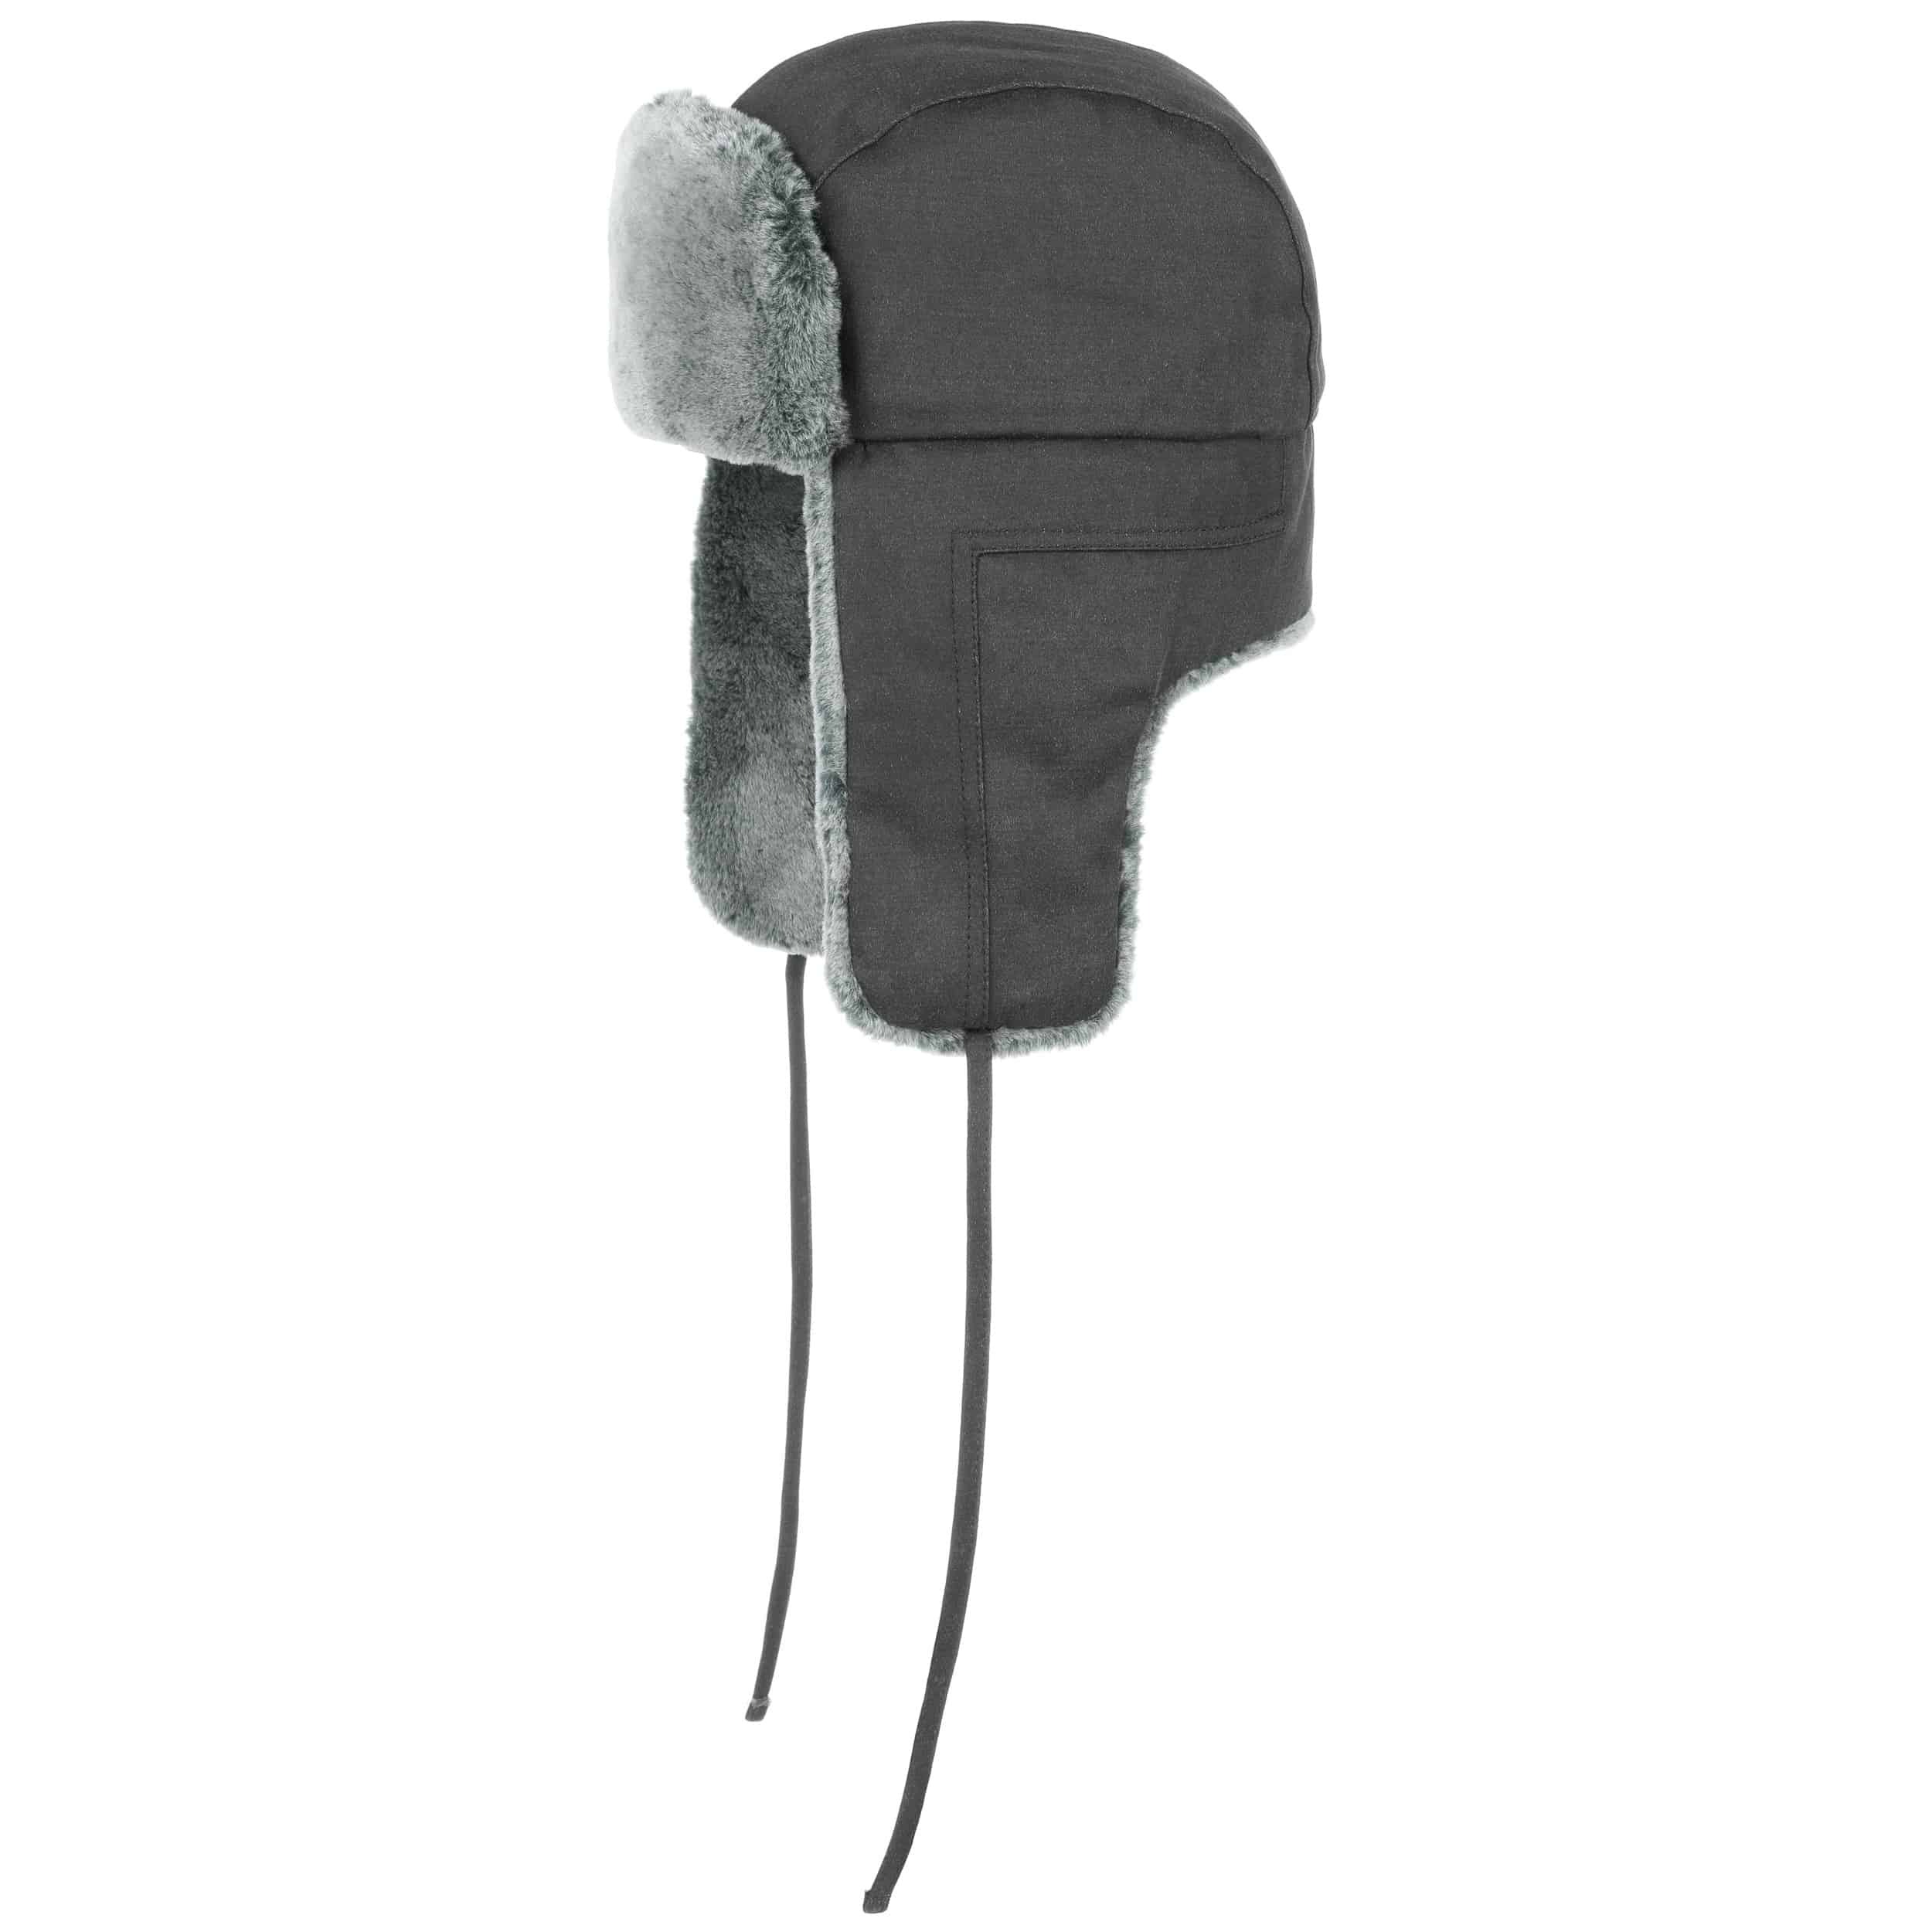 Old Cotton Aviator Hat by Stetson - 59,00 €